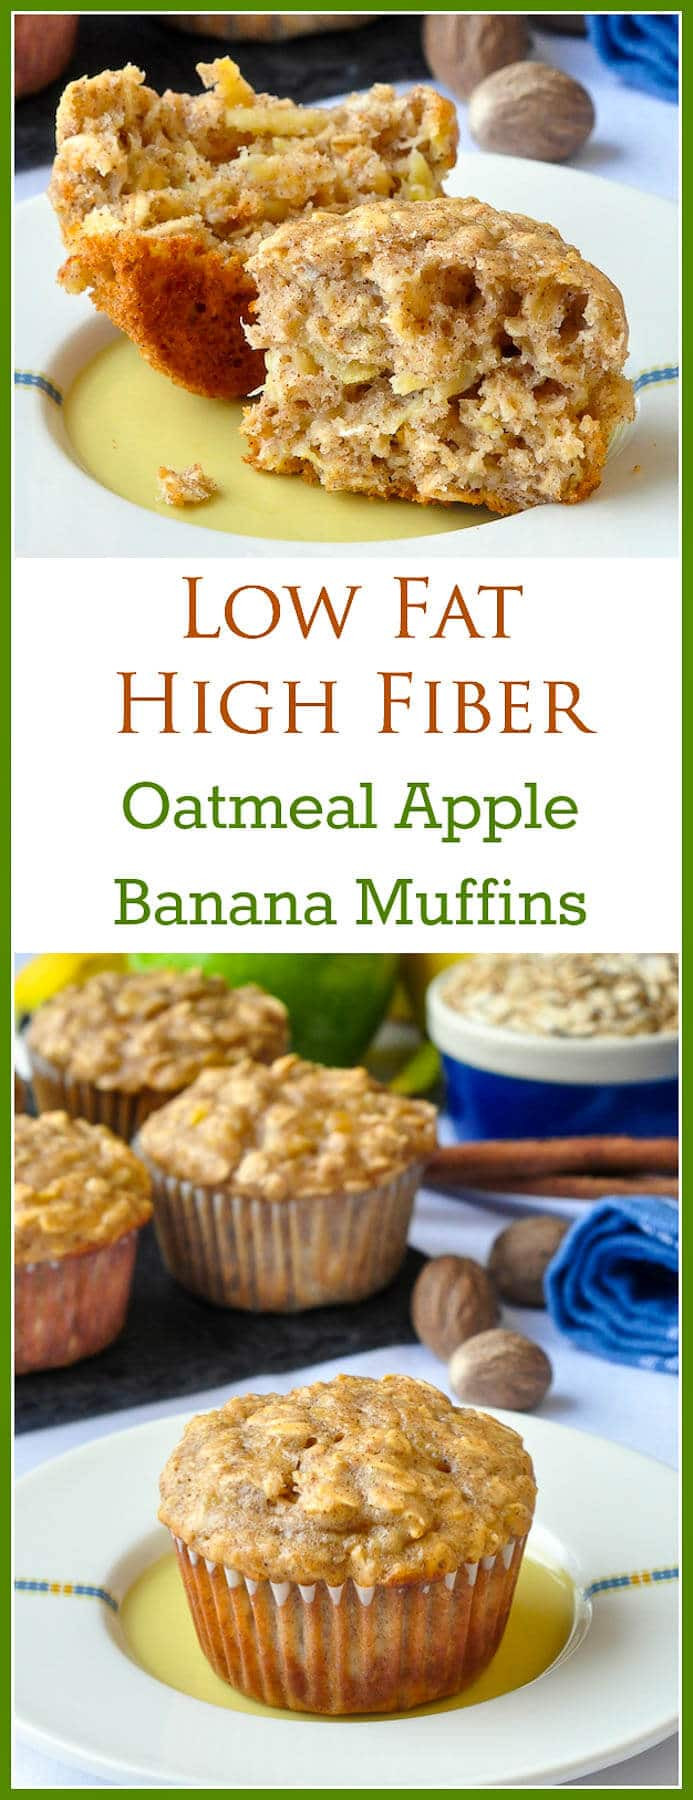 Low Fat Muffin Recipes
 Oatmeal Apple Banana Low Fat Muffins Easy delicious